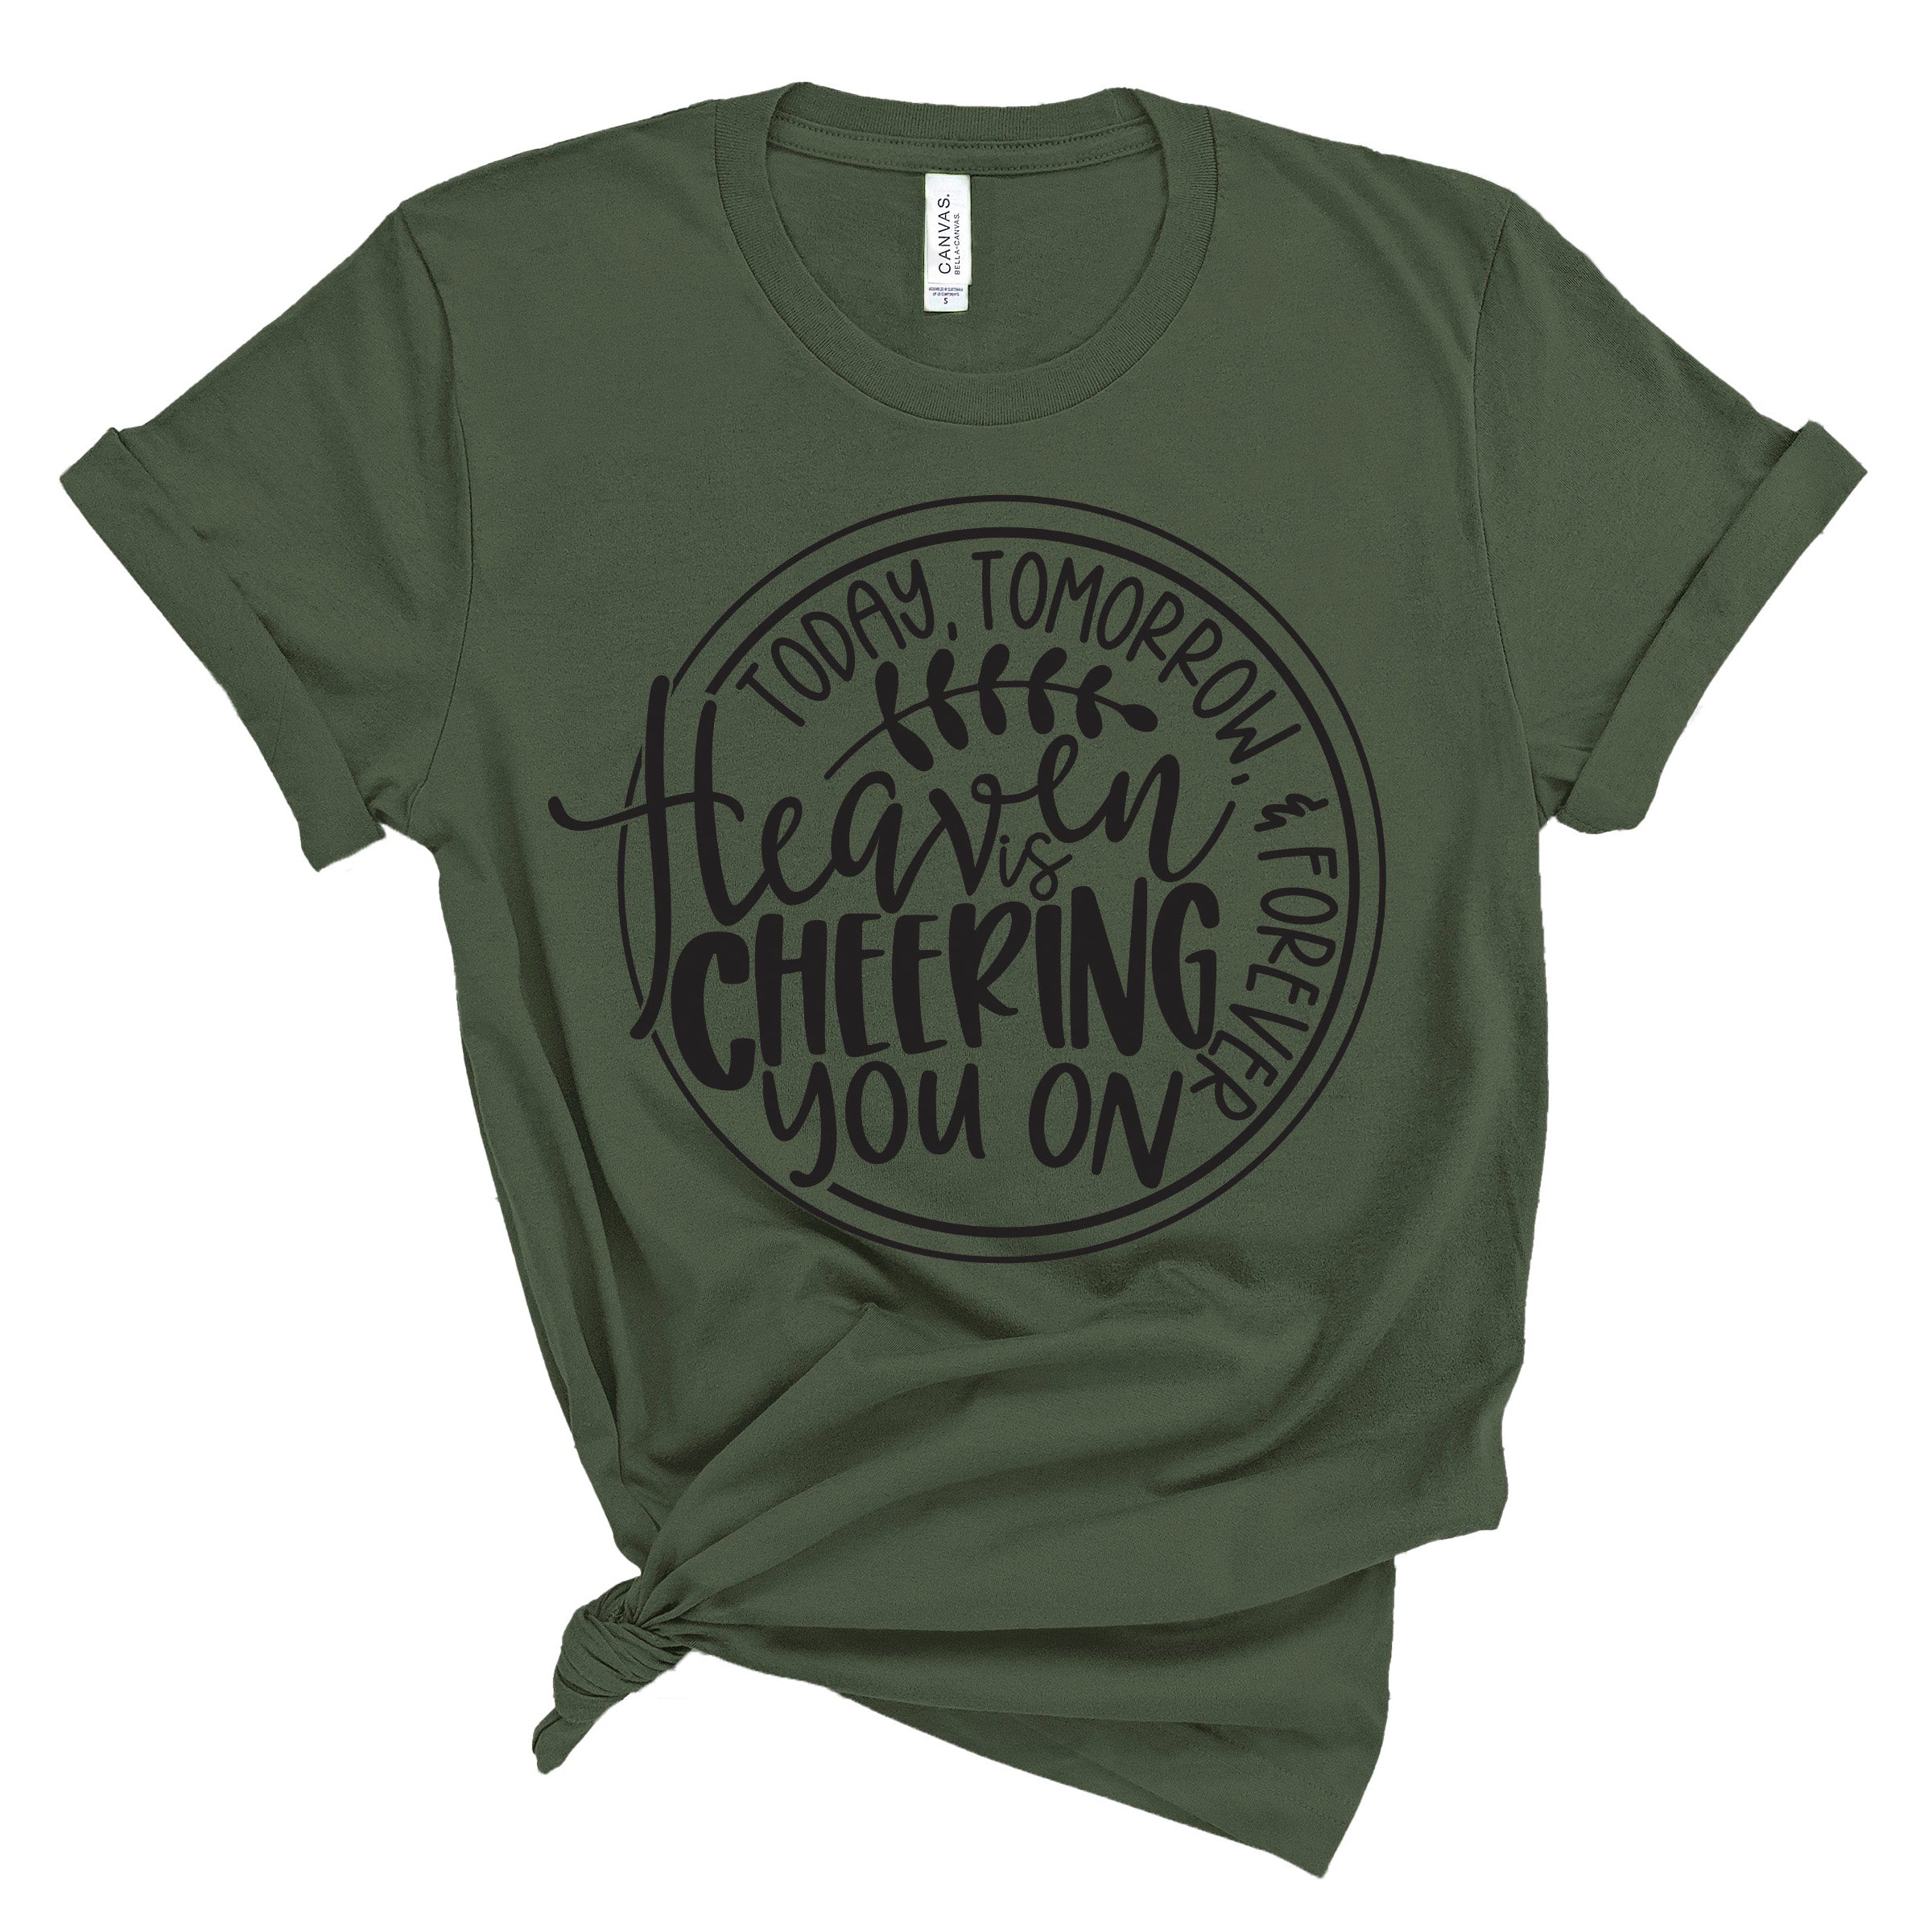 Heaven is Cheering You On Shirt